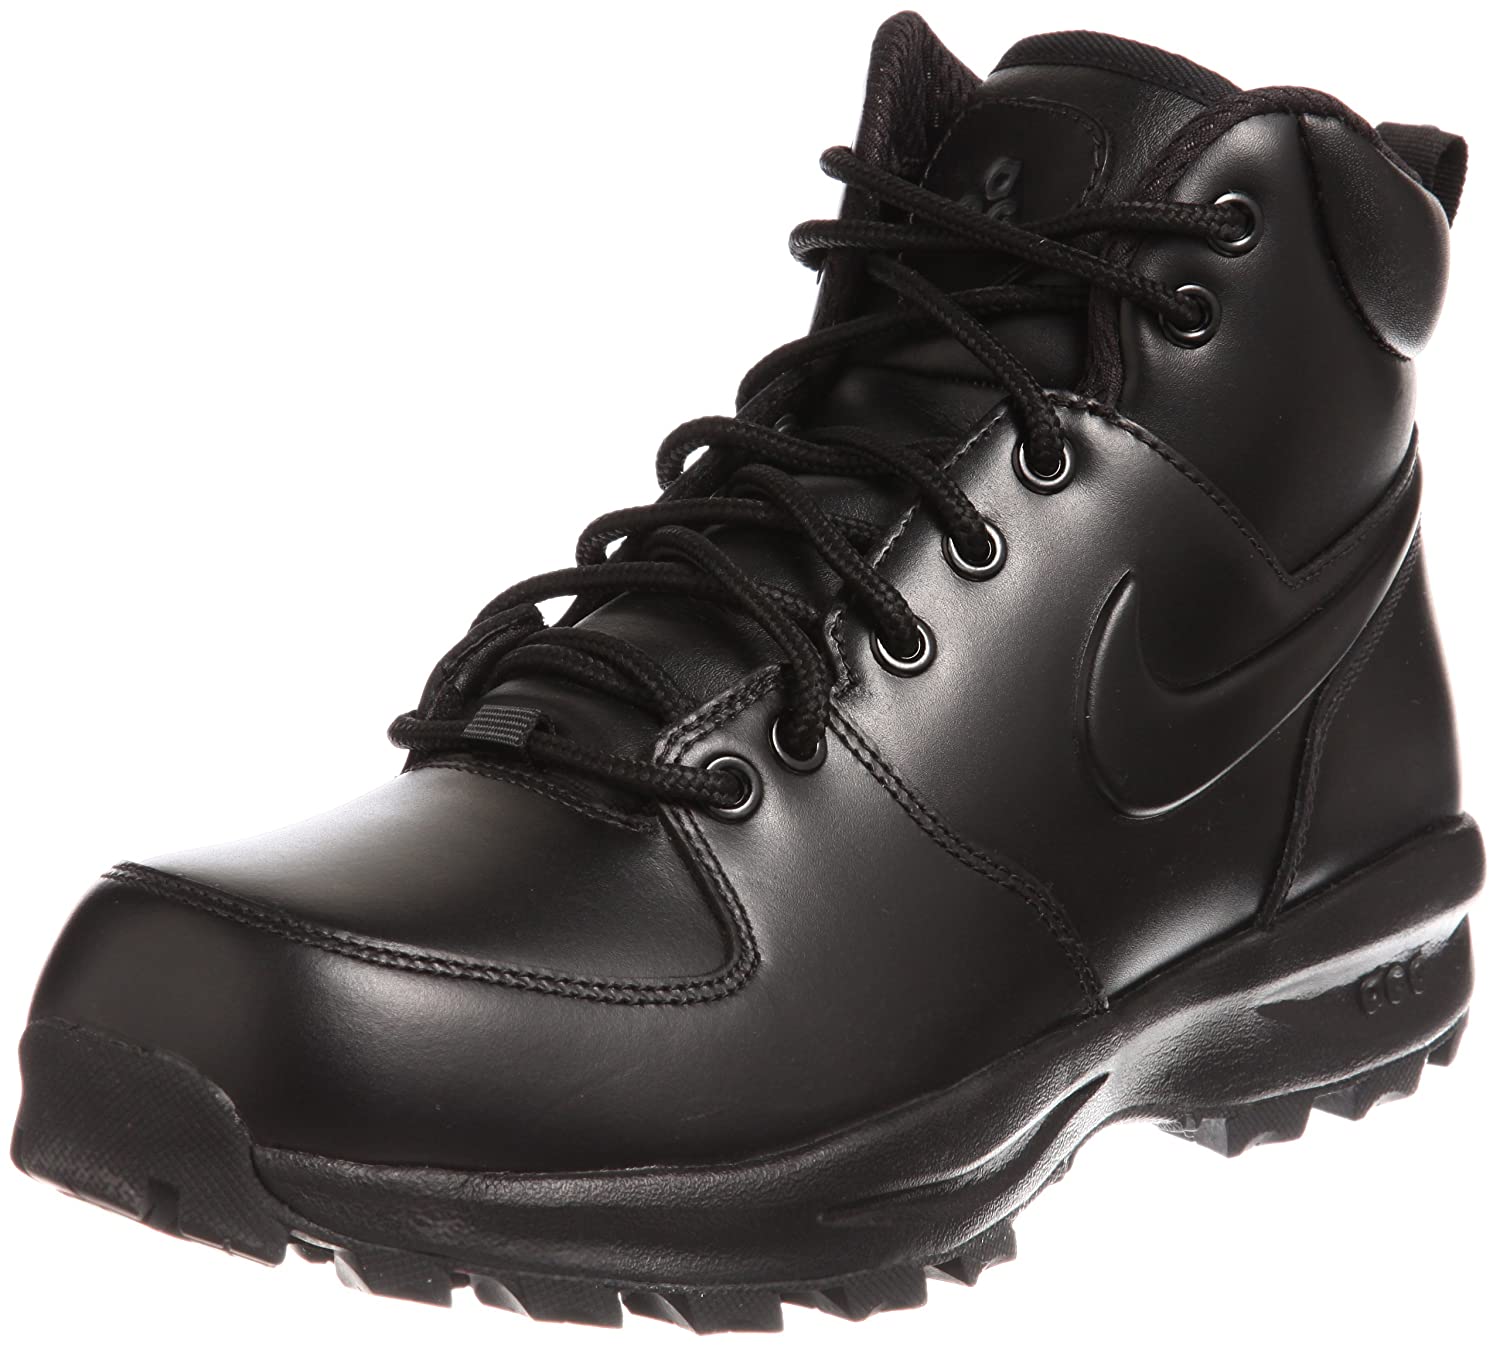 nike manoa boots for men